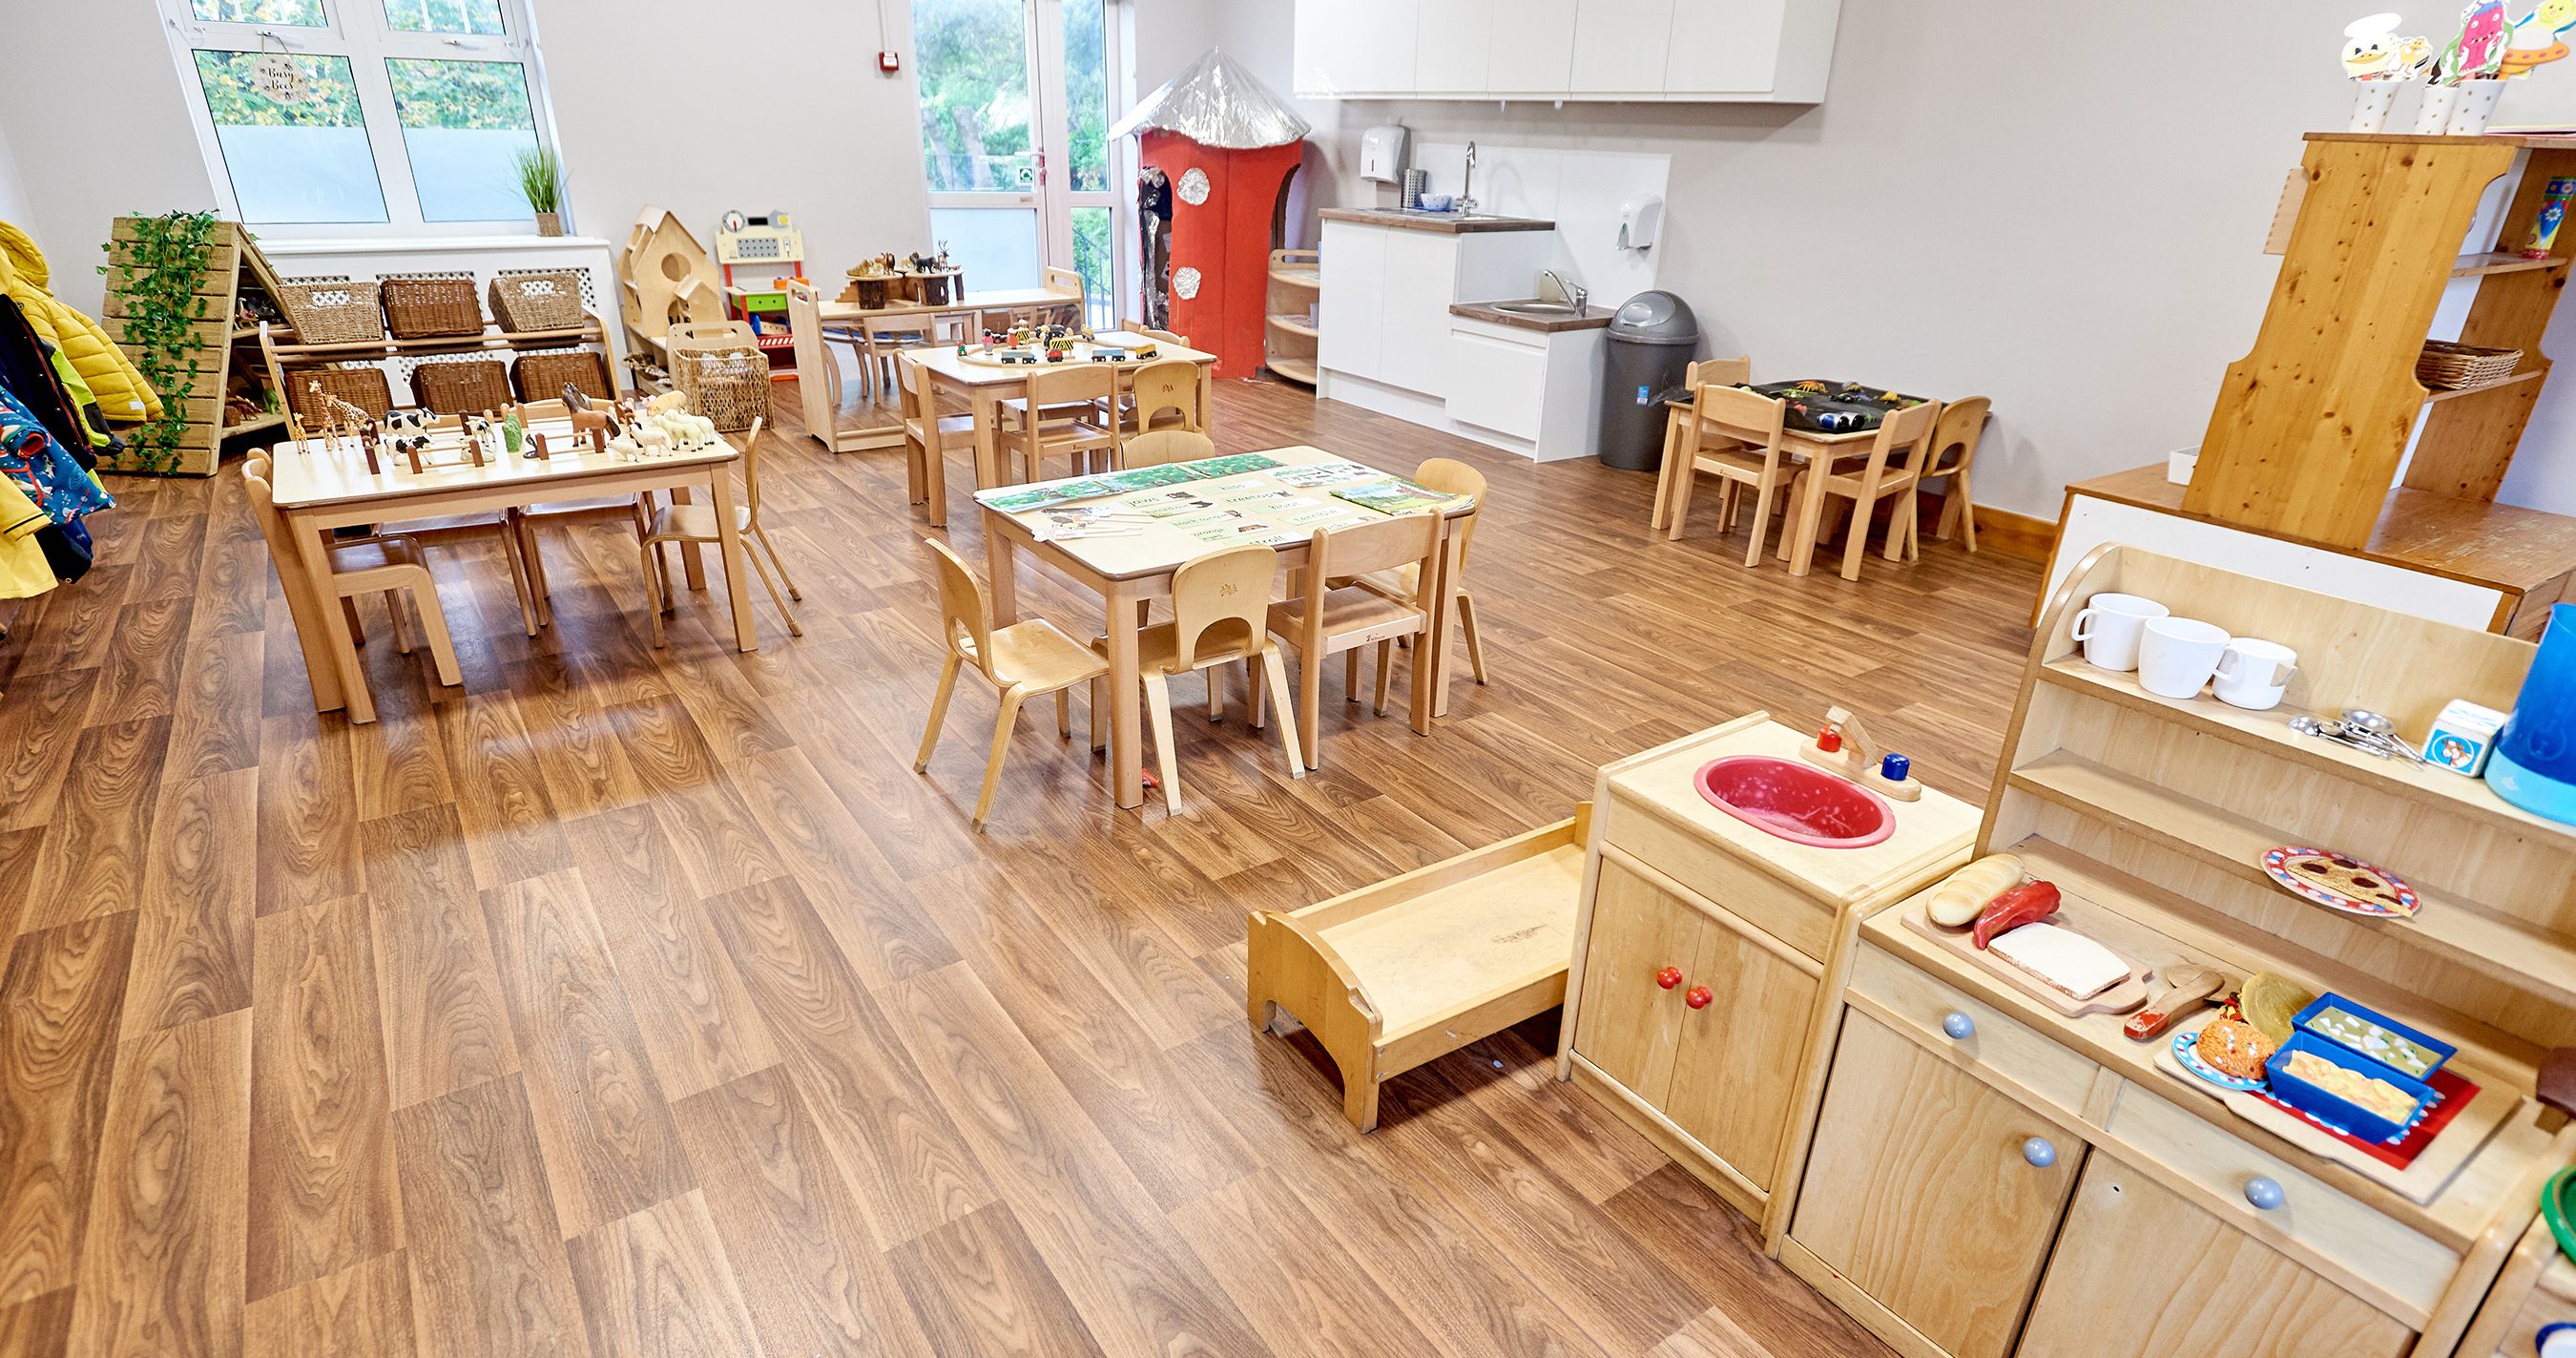 Busy Bees at Harrogate Pannal Ash - The best start in life Busy Bees at Harrogate Pannal Ash Harrogate 01423 501492